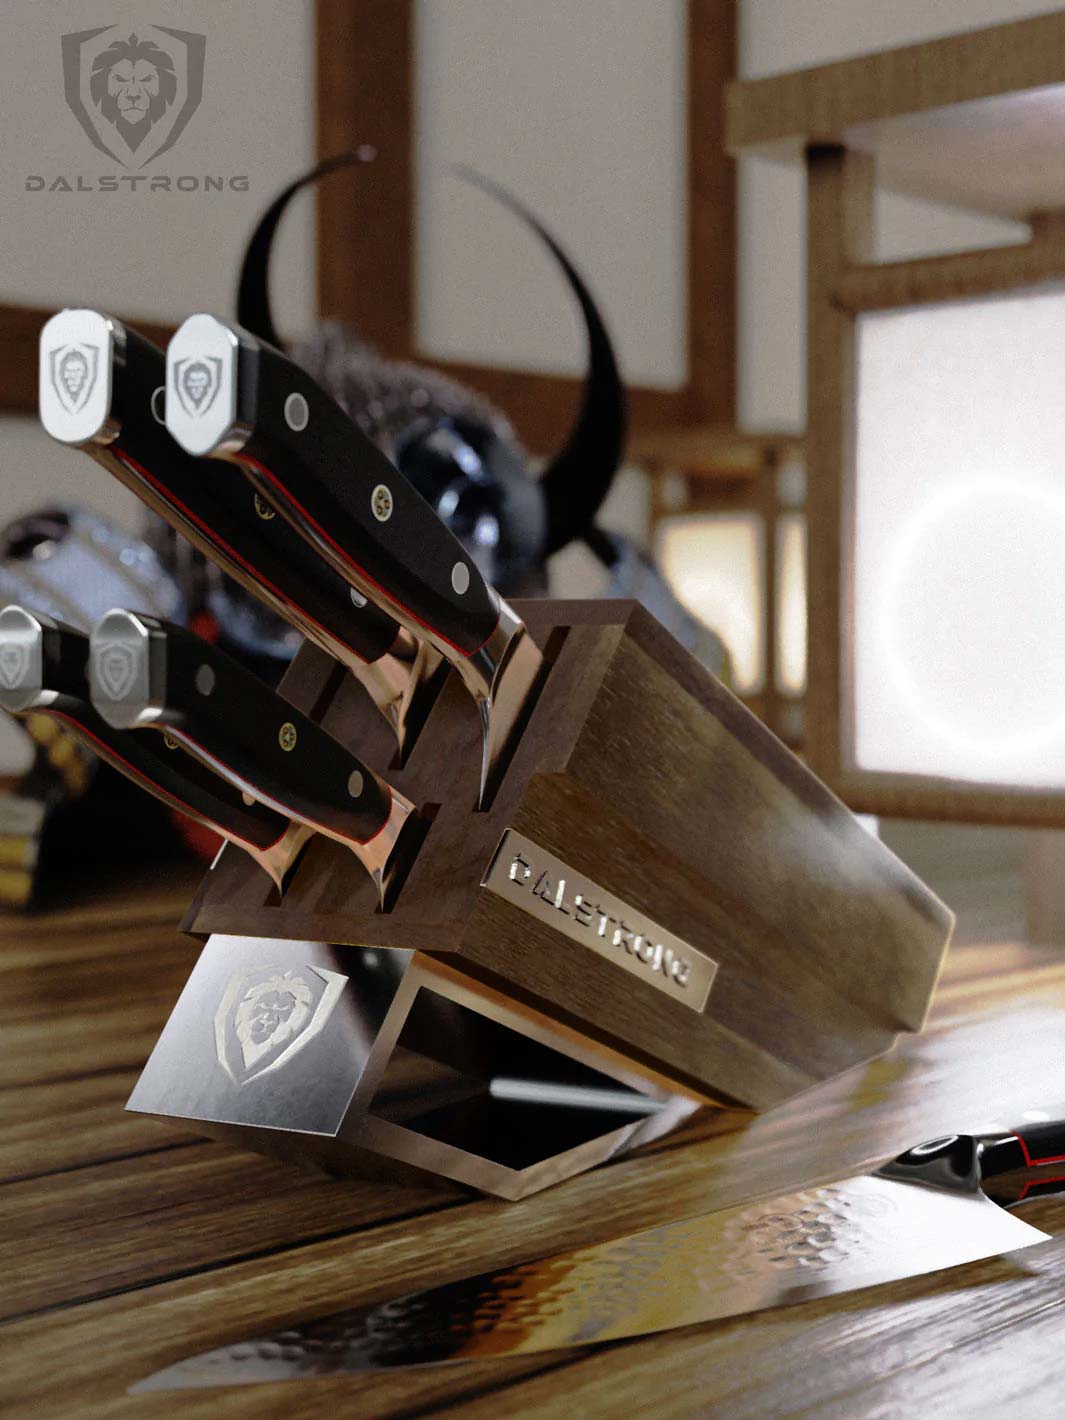 Dalstrong shogun series 5 piece knife block set with black handles on top of a wooden table.